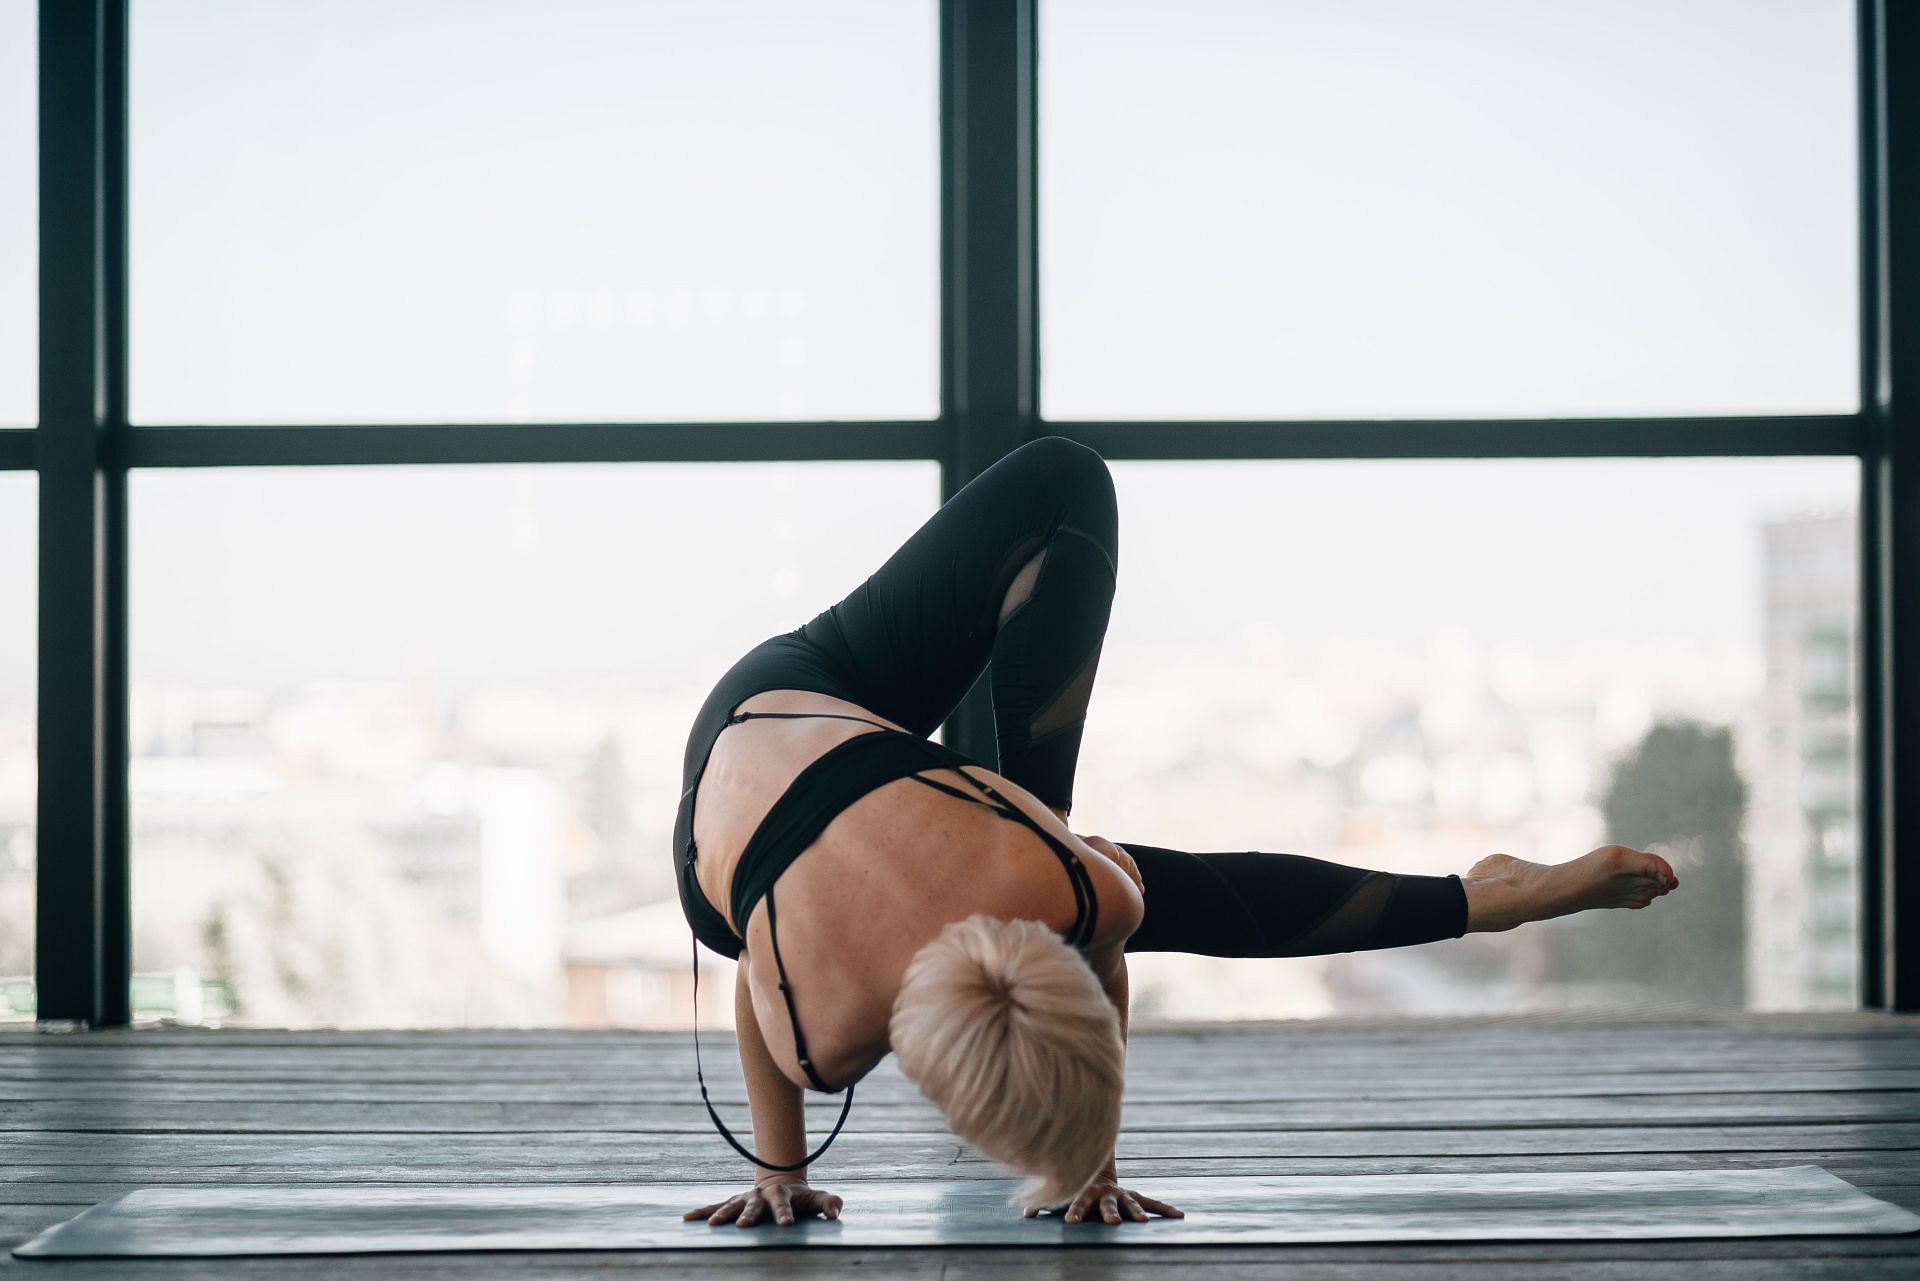 All you need is a mat for at-home pilates (Image via Unsplash/Dmitriy Frantsev)